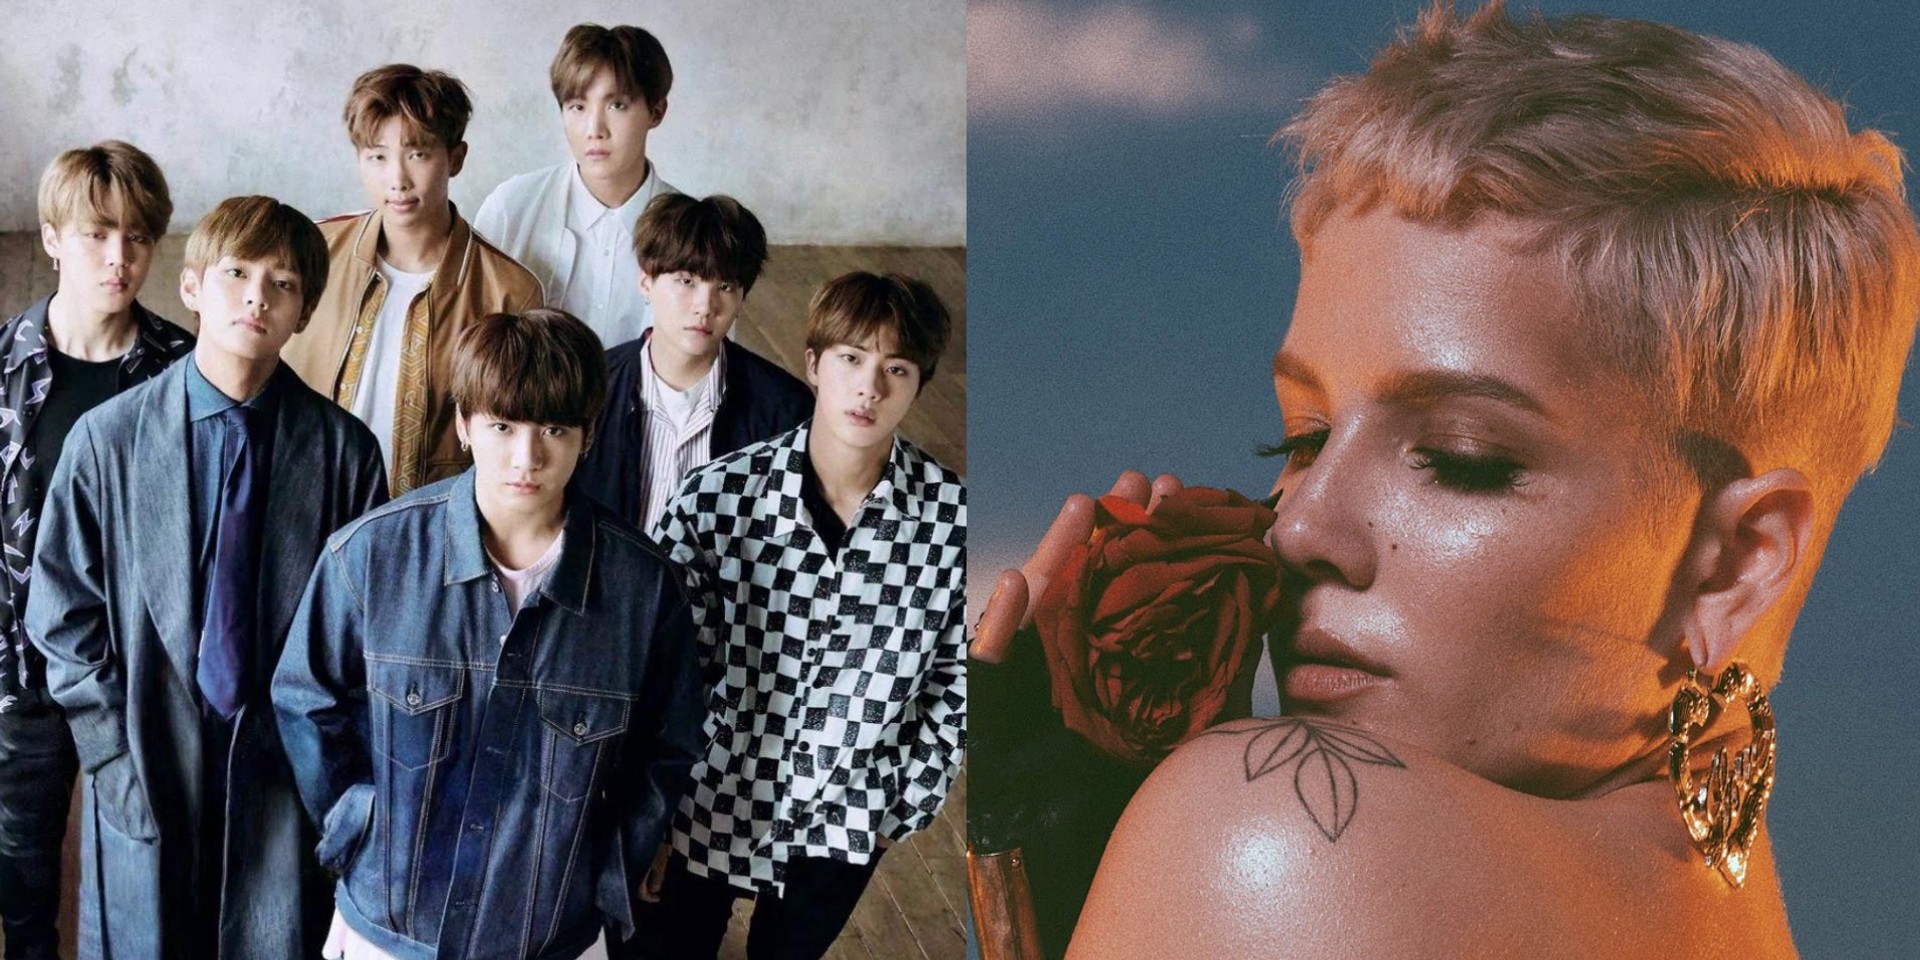 BTS and Halsey break YouTube record set by BLACKPINK